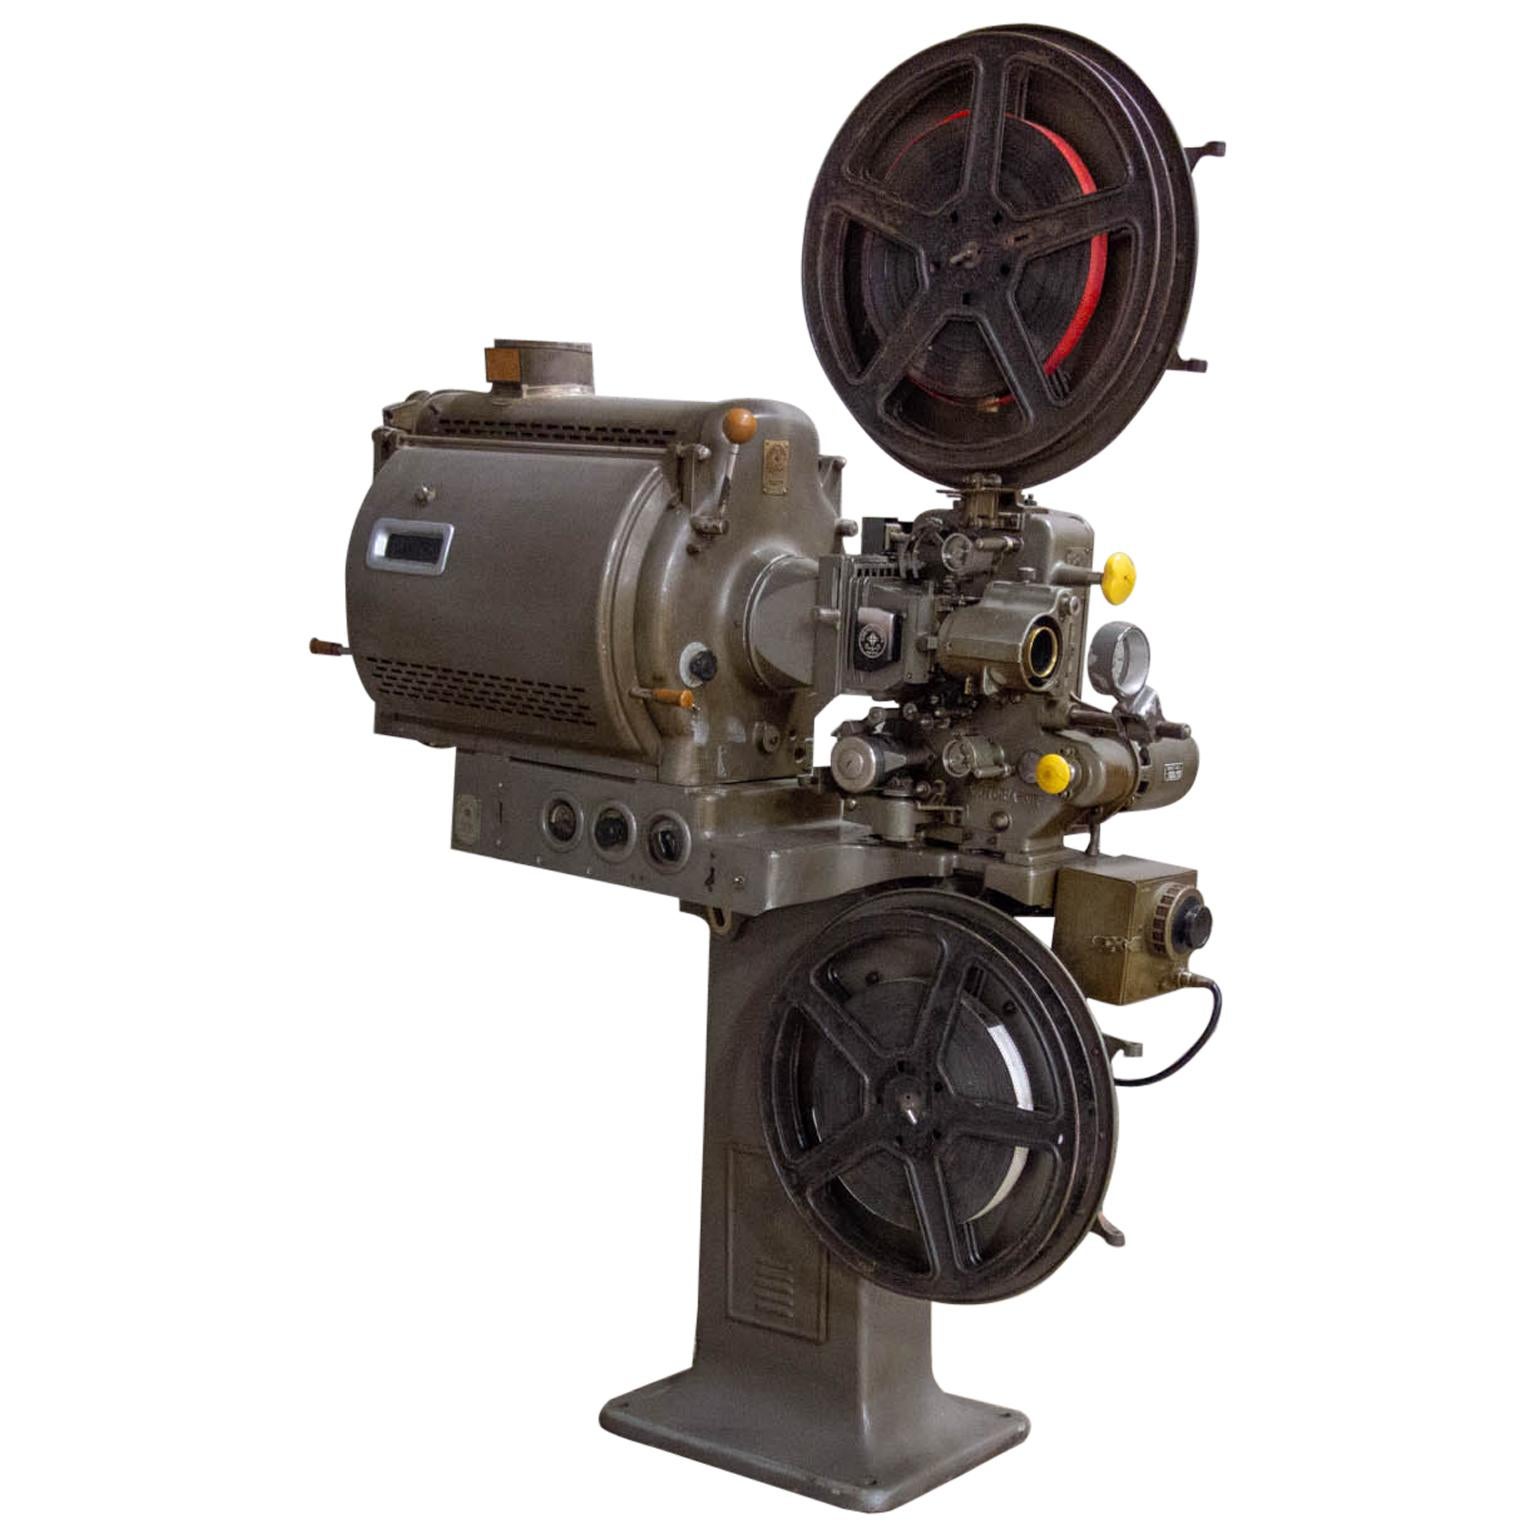 Midcentury Film Projector, Cinemeccanica Milano at 1stDibs